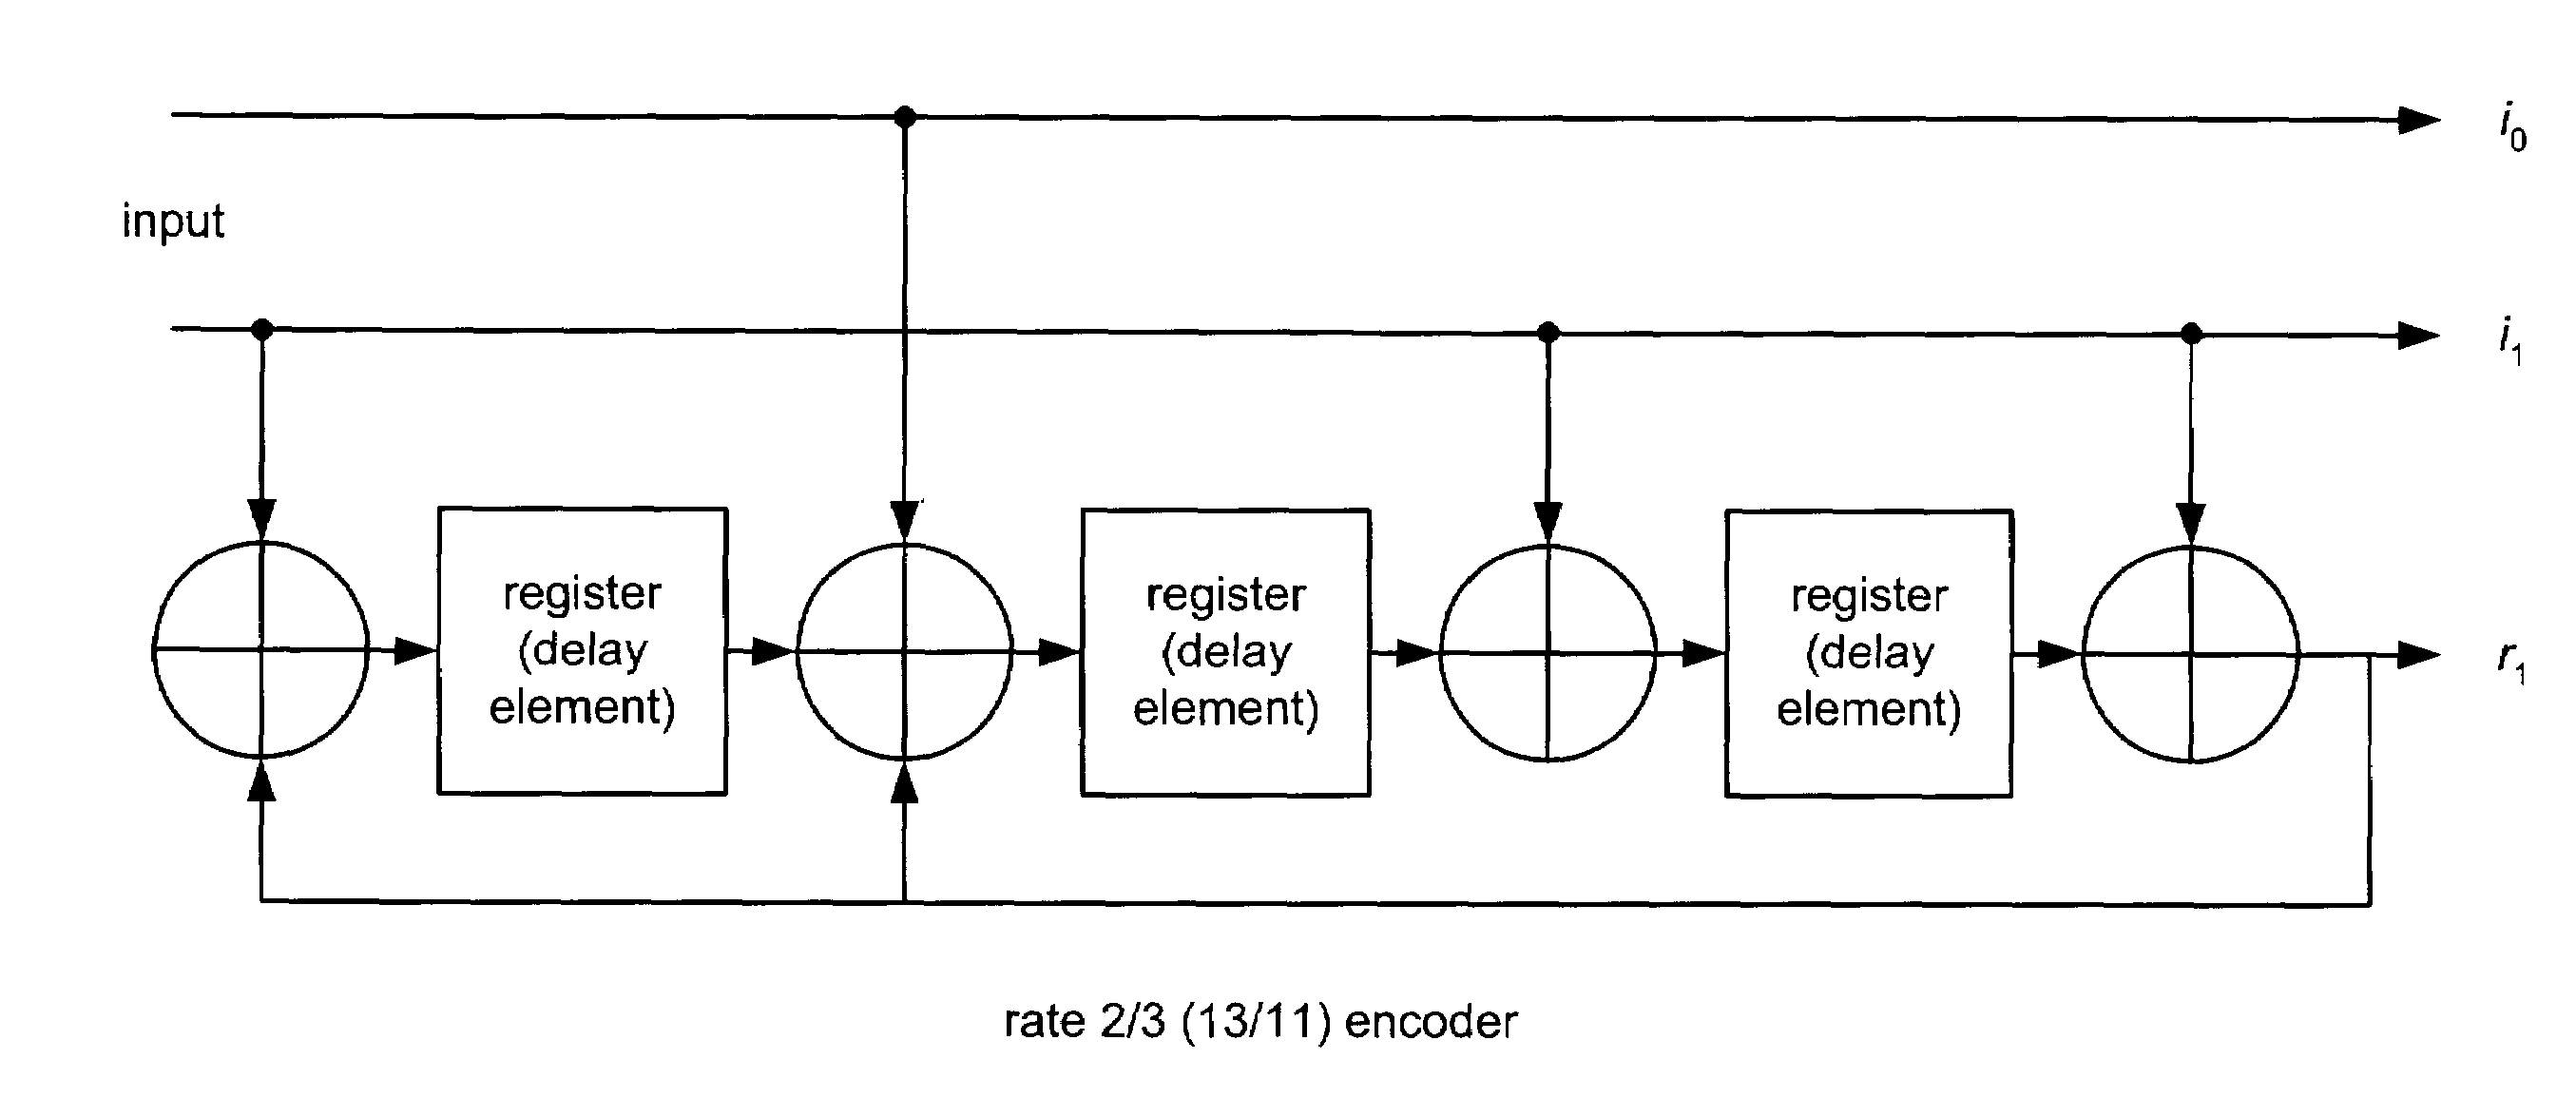 Close two constituent trellis of a turbo encoder within the interleave block